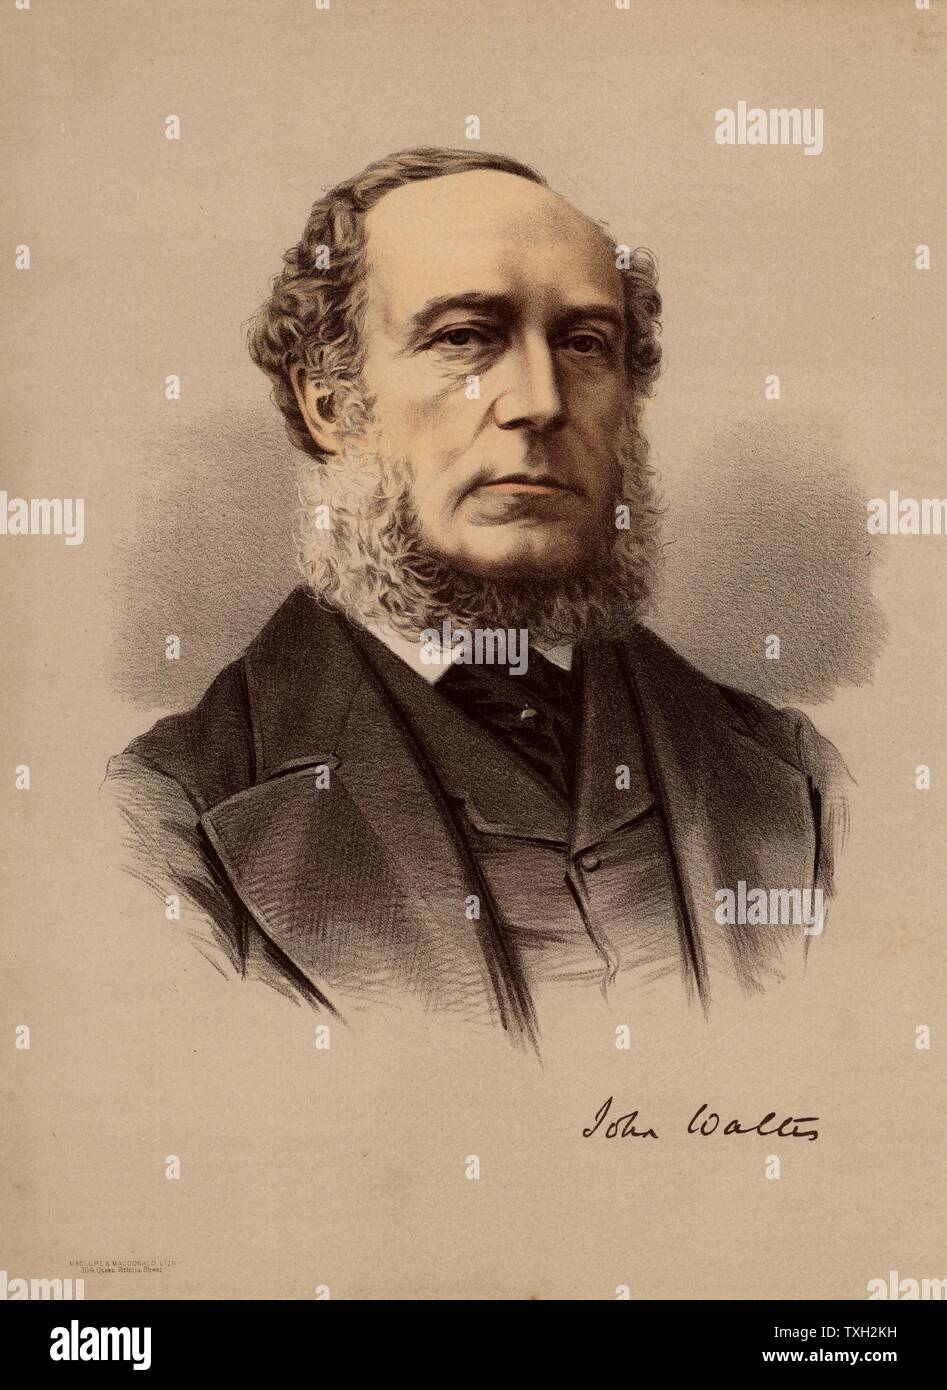 John Walter the Younger (1818-1894) English newspaper proprietor and politician. Chief proprietor of 'The Times', London. Introduced the Walter printing press in 1869. A Member of Parliament from 1845-1885. From 'The Modern Portrait Gallery' (London, c1880). Tinted lithograph. Stock Photo